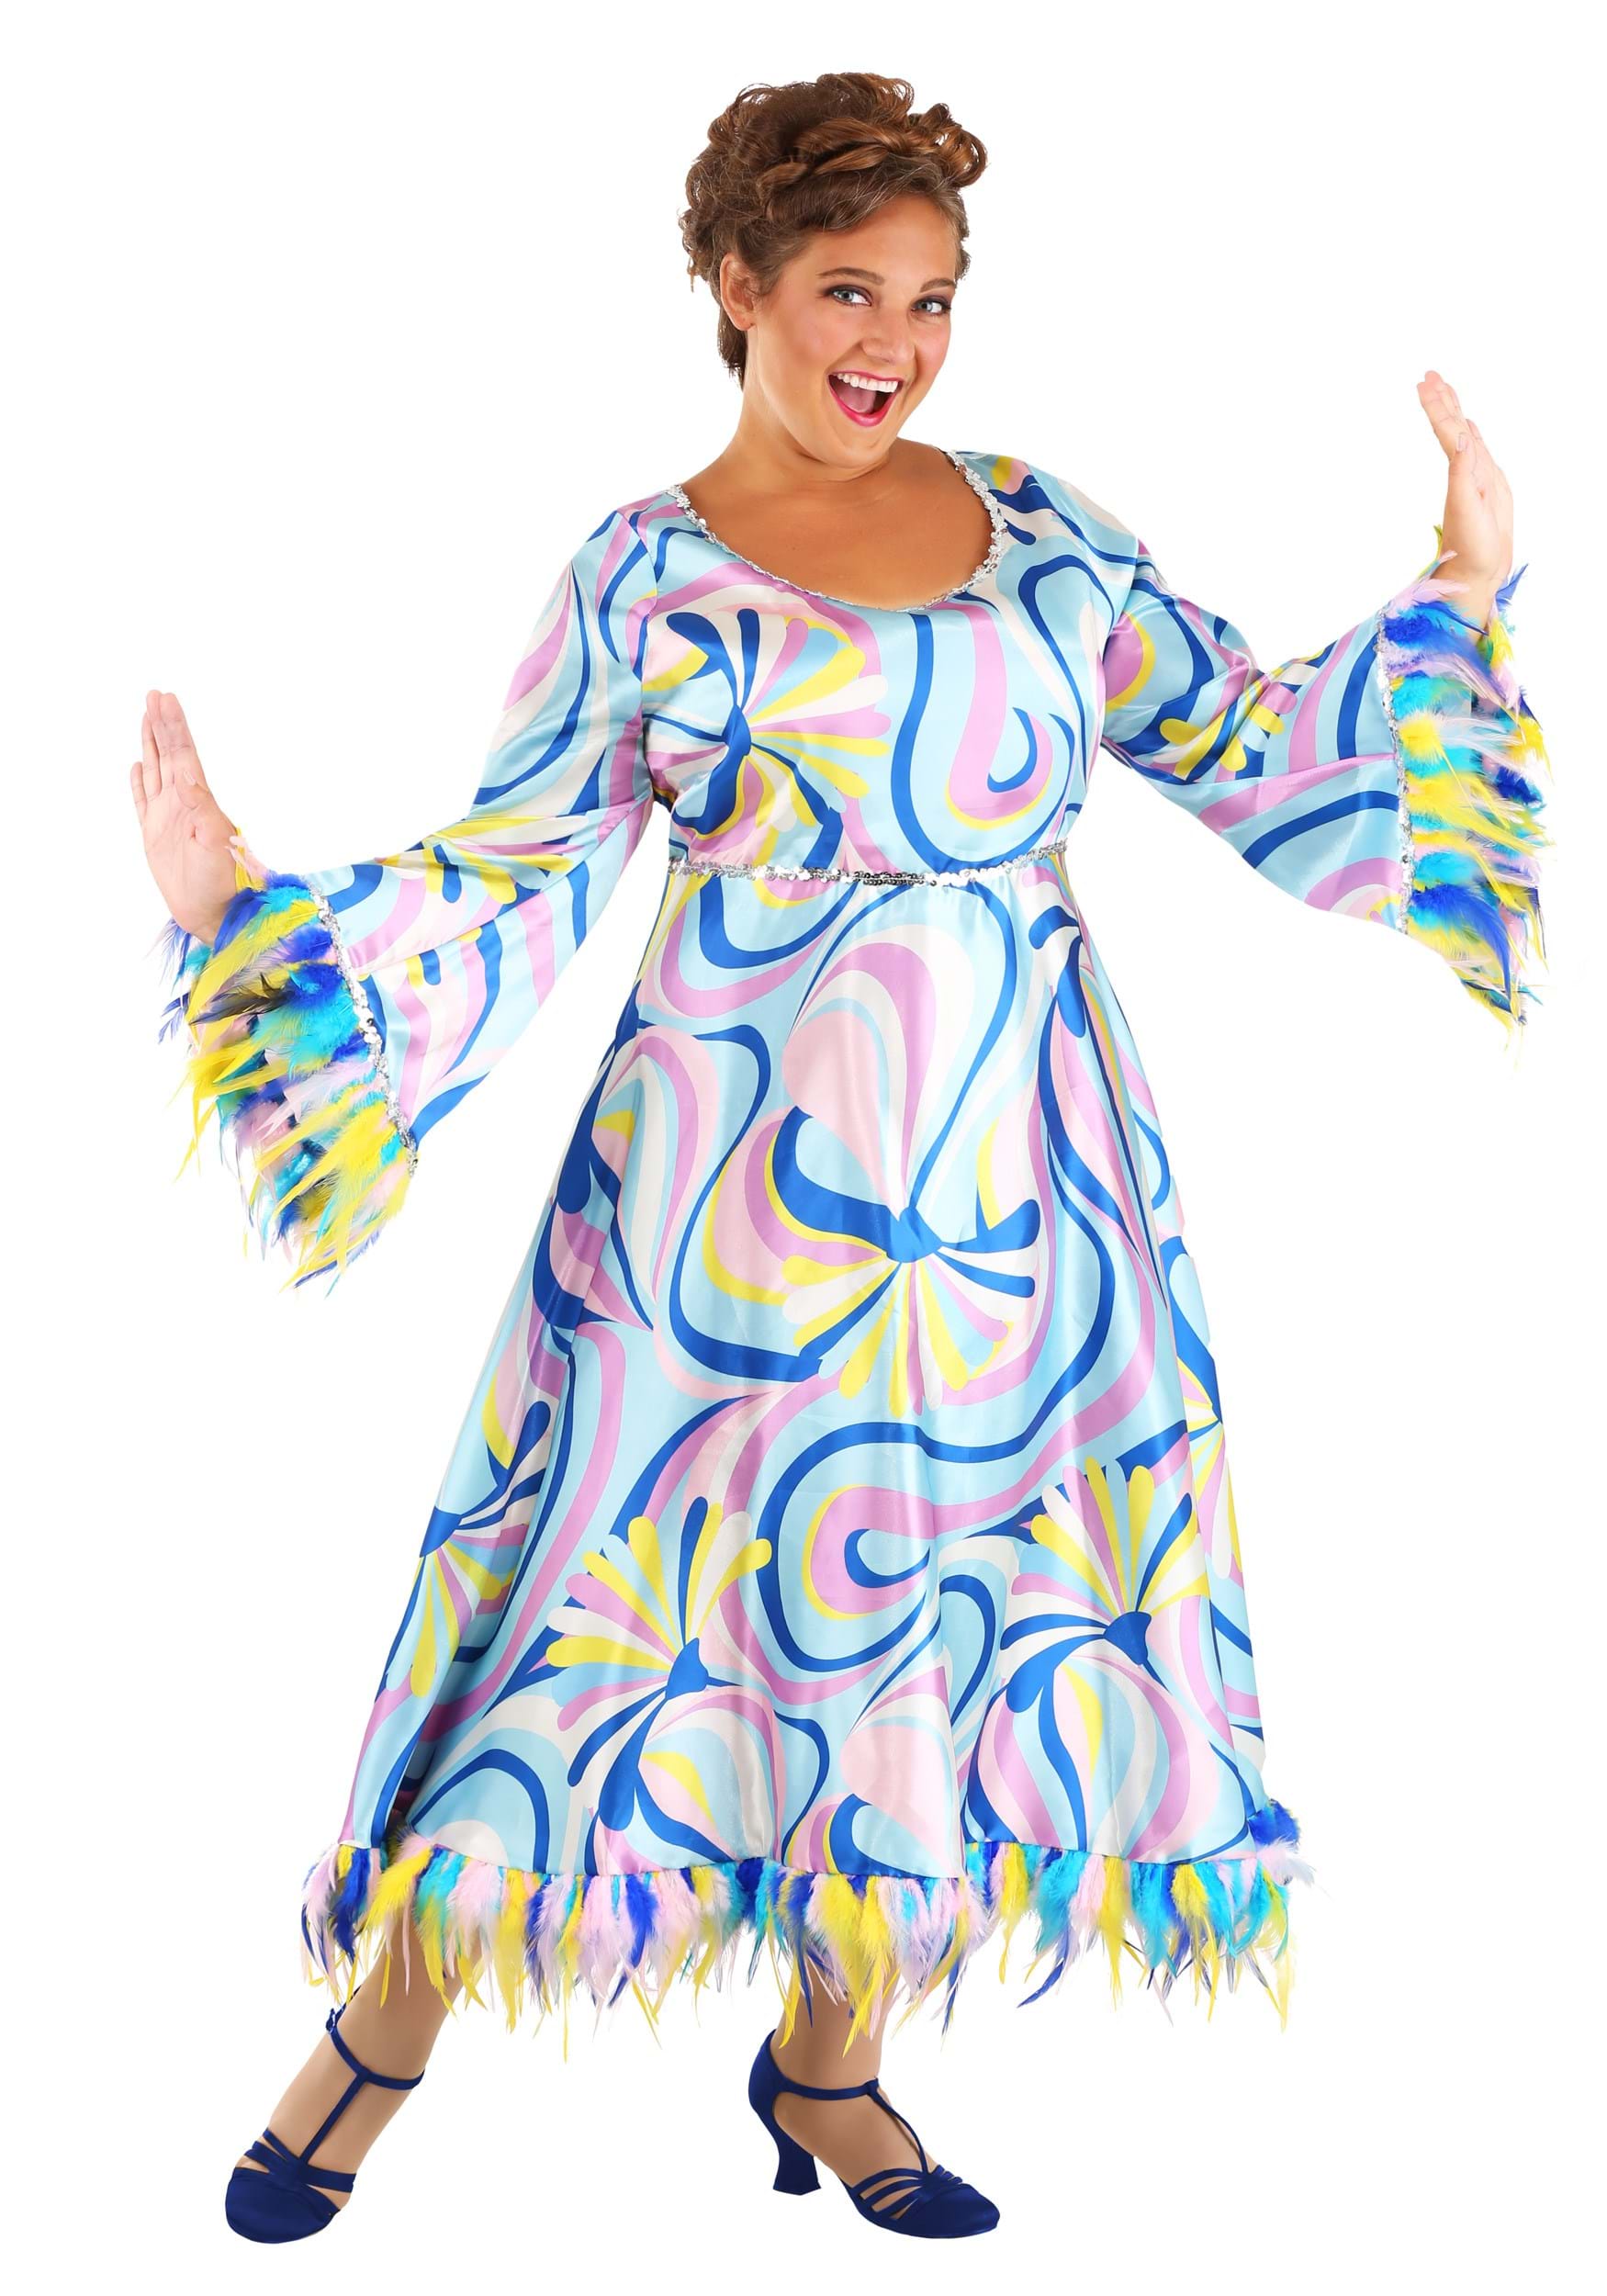 https://images.halloweencostumes.ca/products/64182/1-1/60s-mama-plus-size-costume.jpg